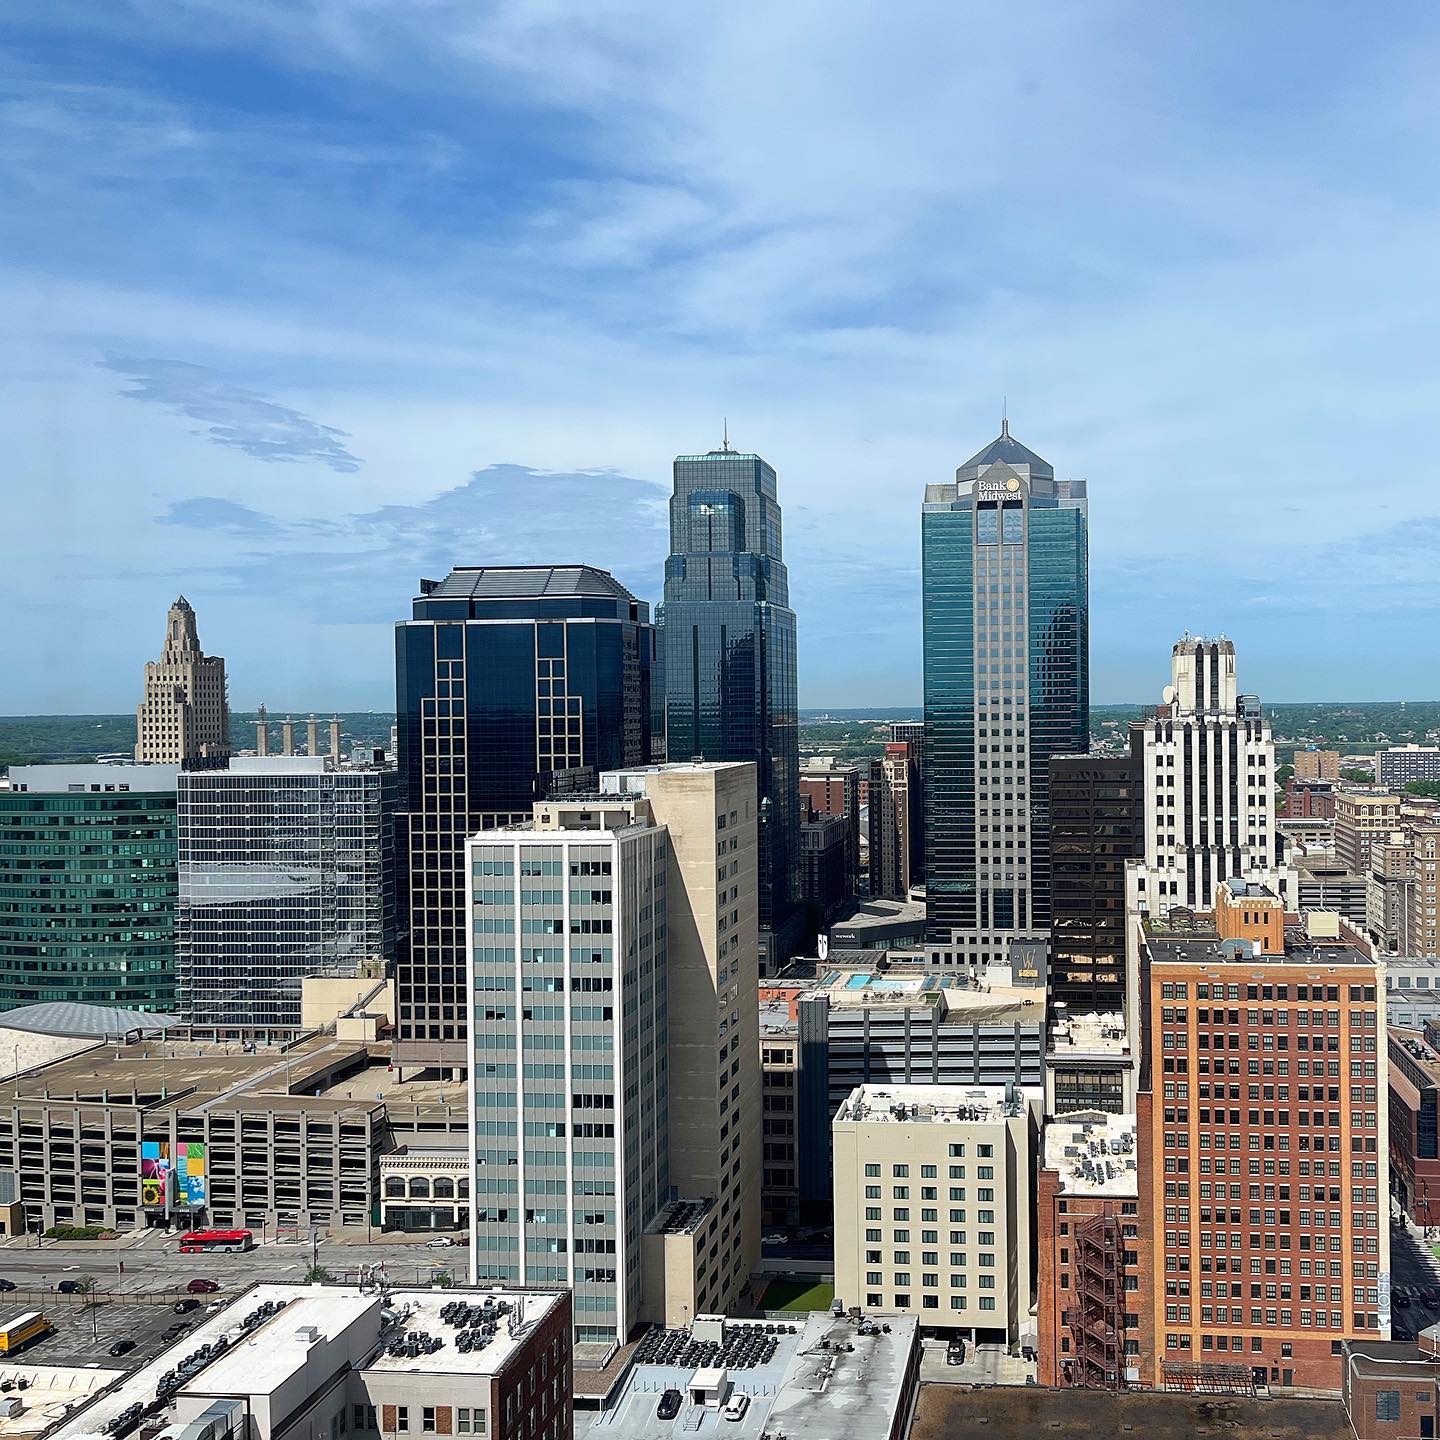 View of downtown Kansas City buildings and skyscrapers. Photo by Instagram user @kansascity.